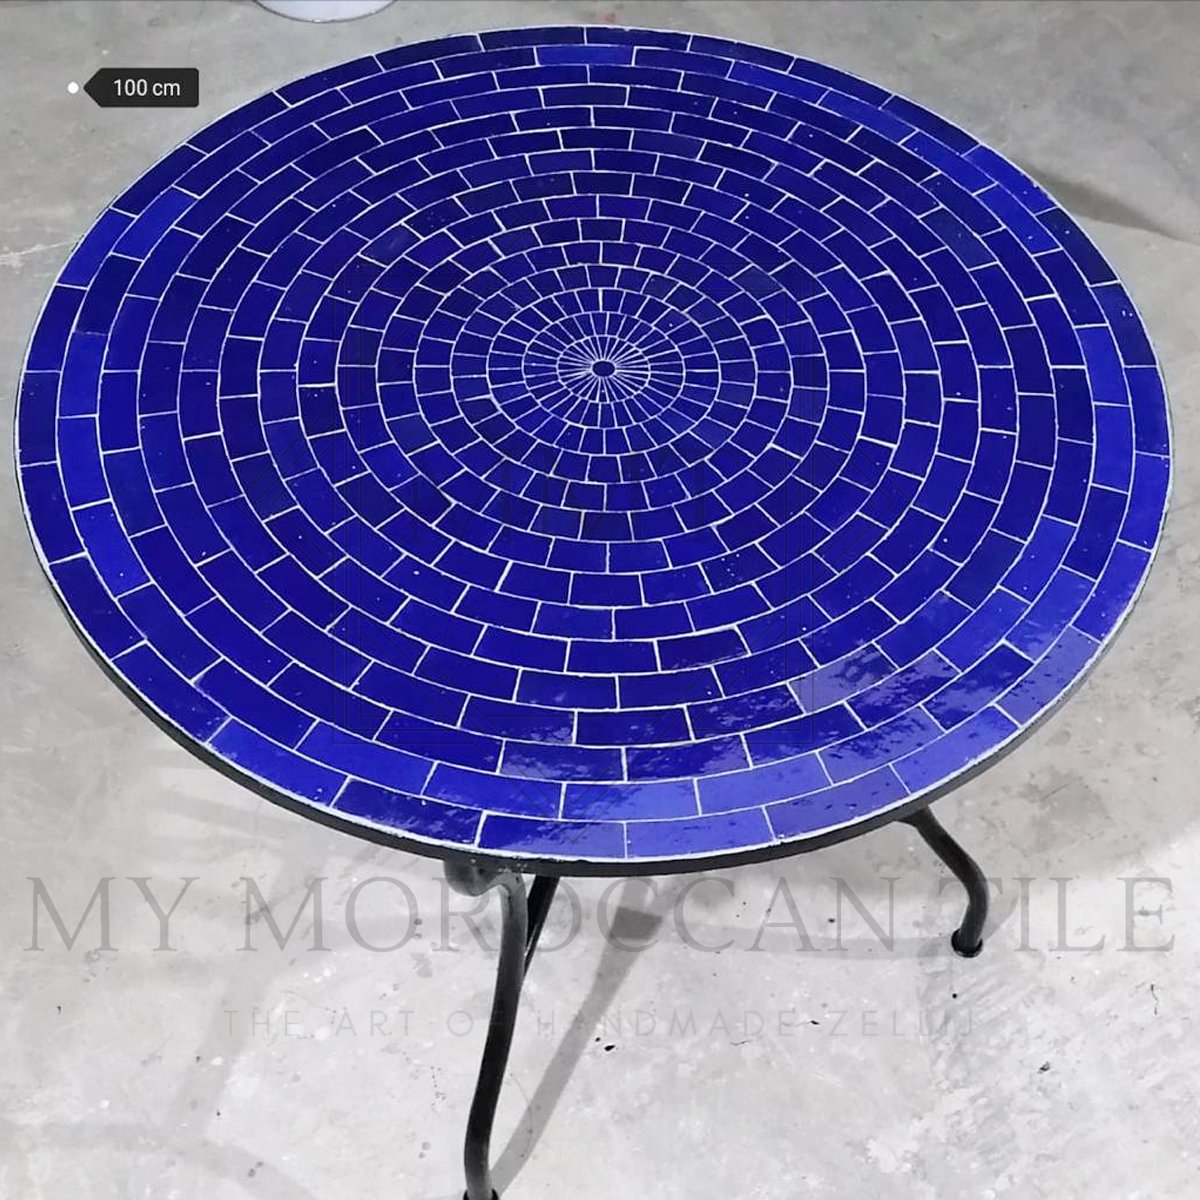 Handmade Moroccan mosaic table with base blue. Great Handmade Outdoor dining table 